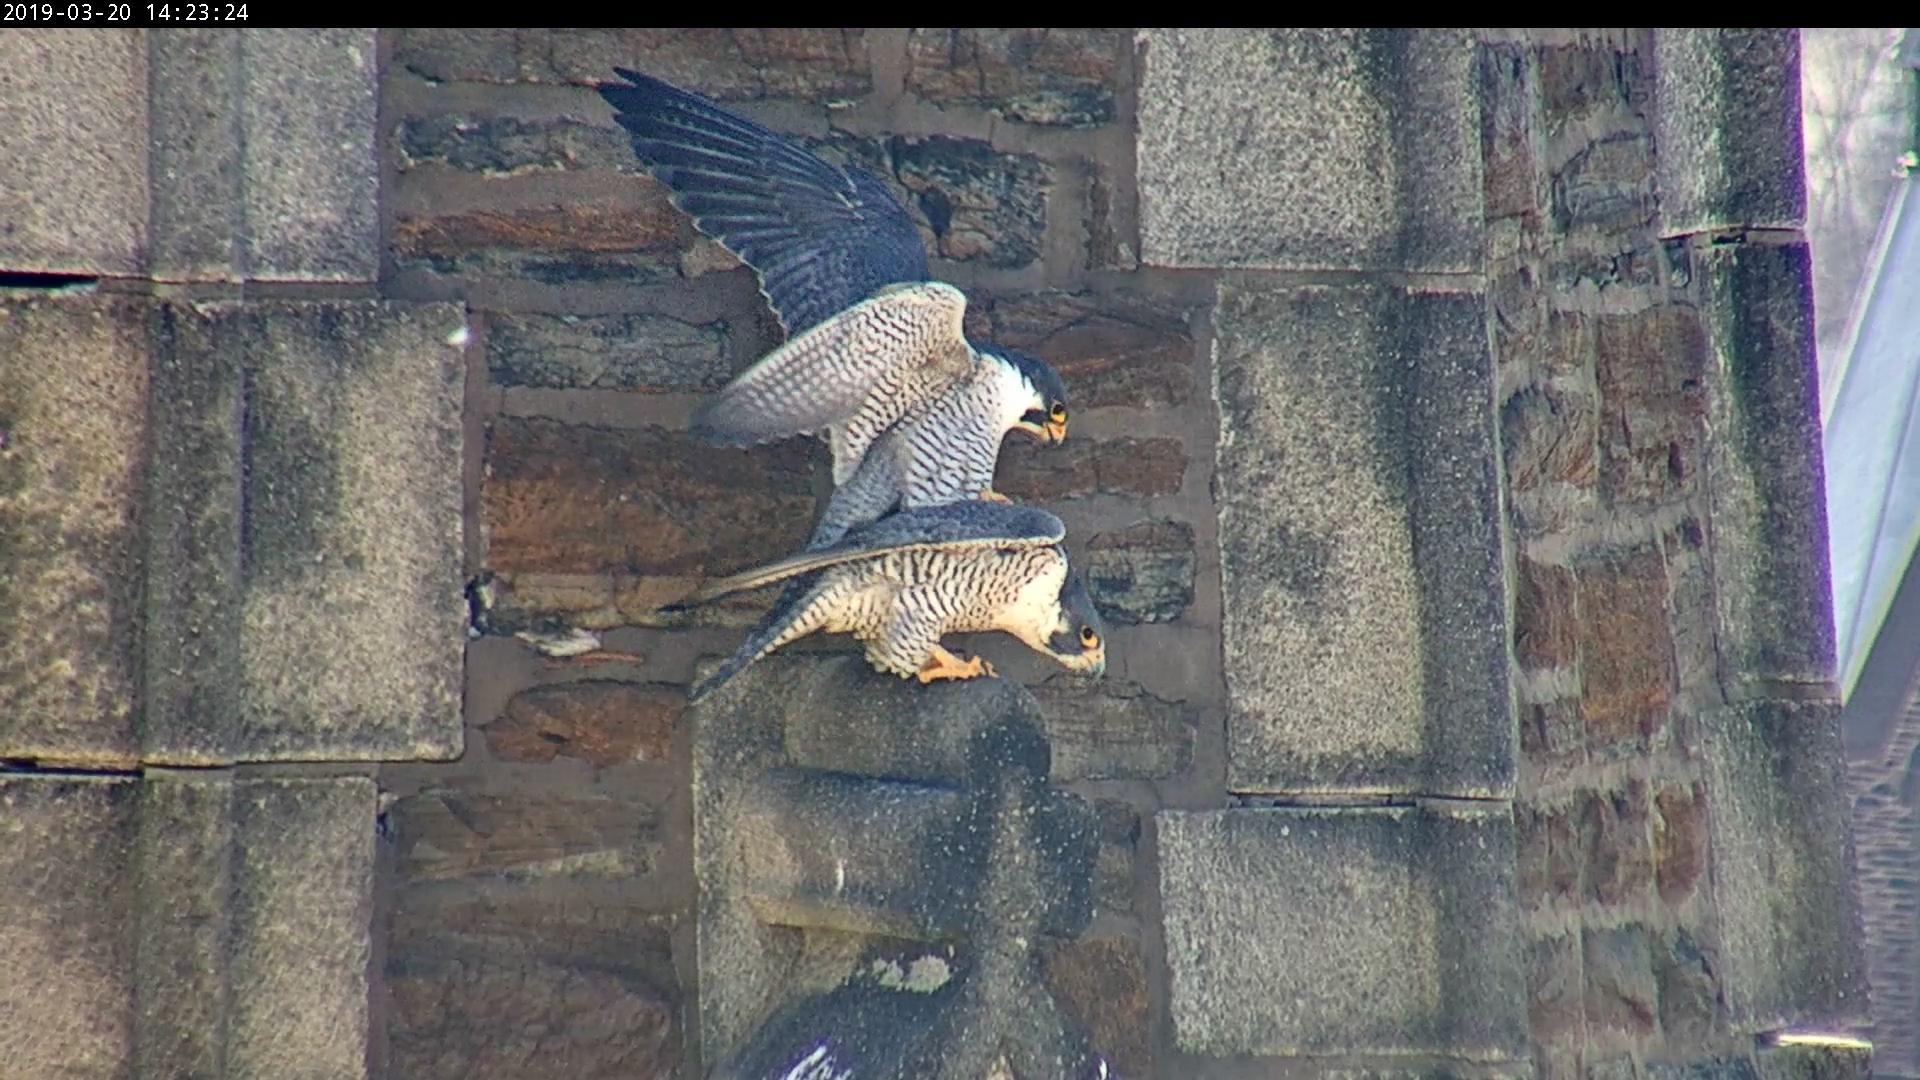 Mating on the steeple